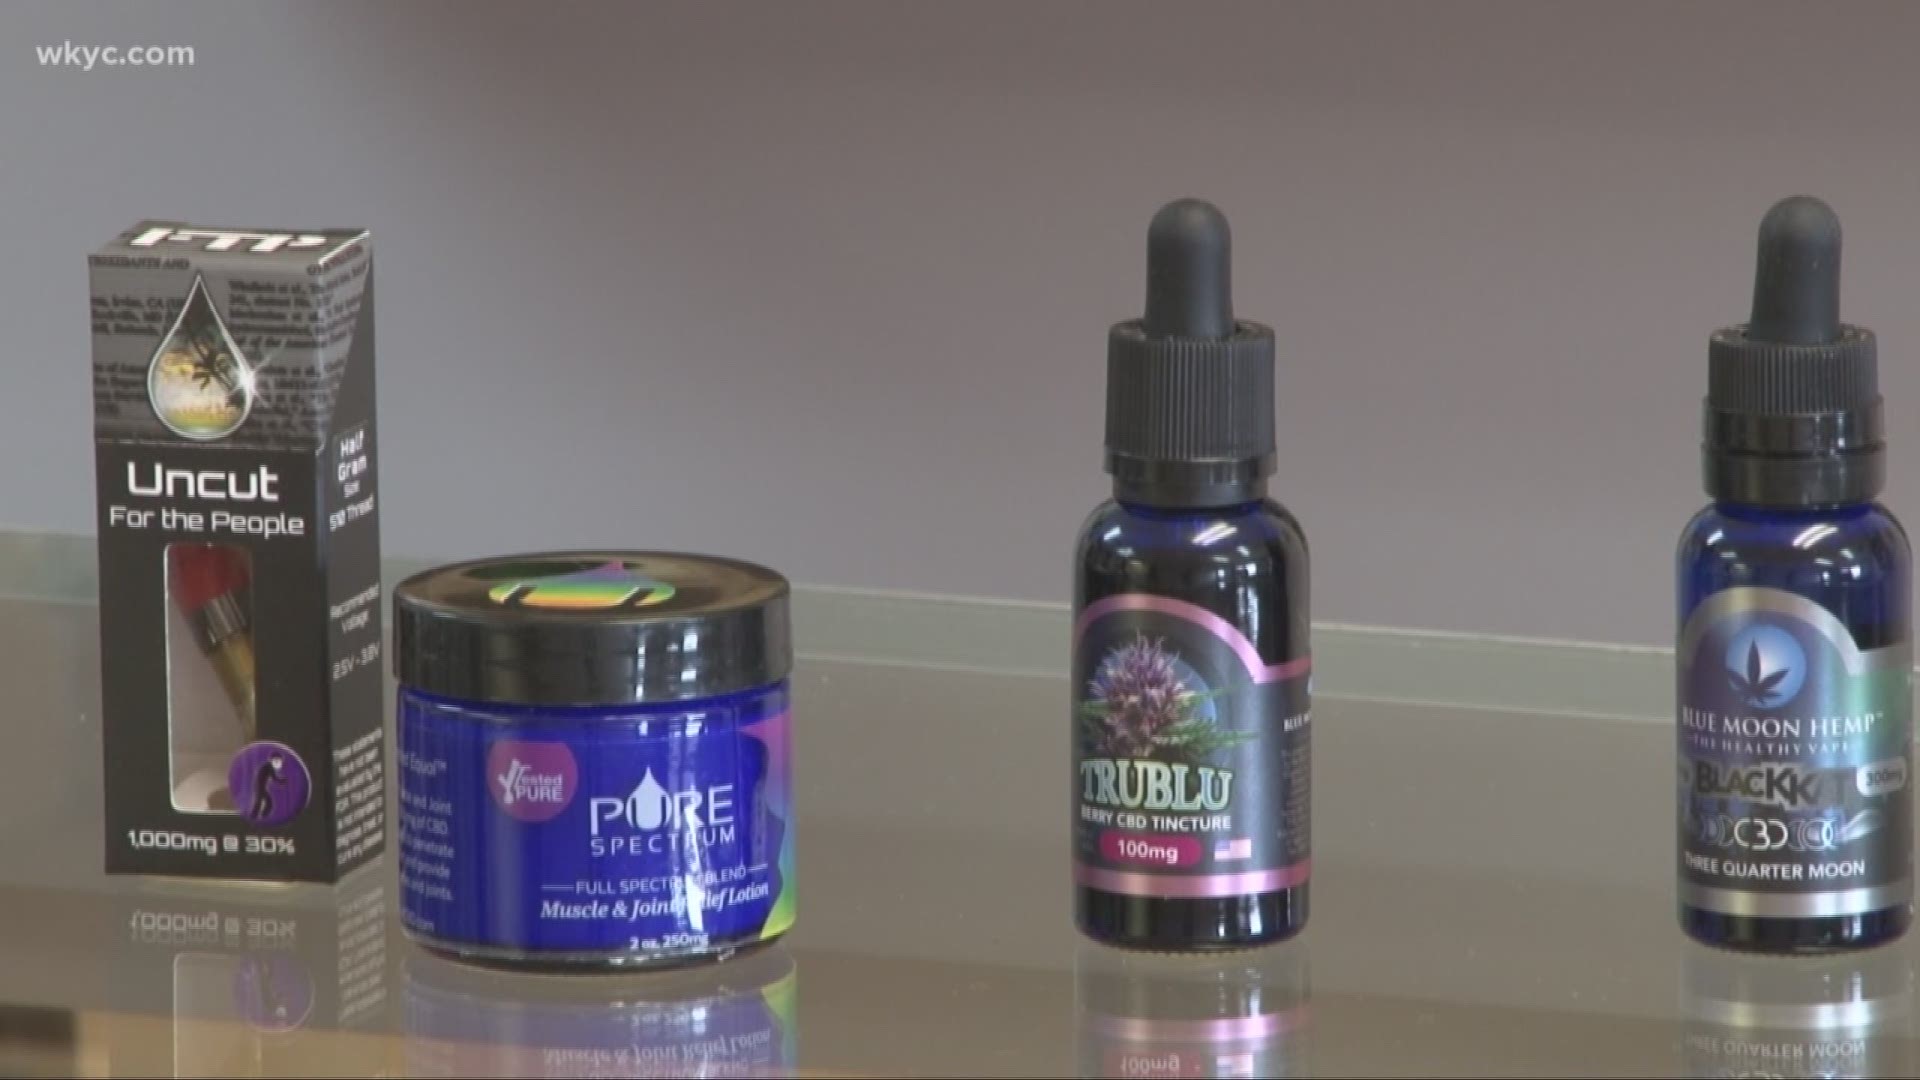 State says it's illegal, but CBD Oil is being sold all over Ohio